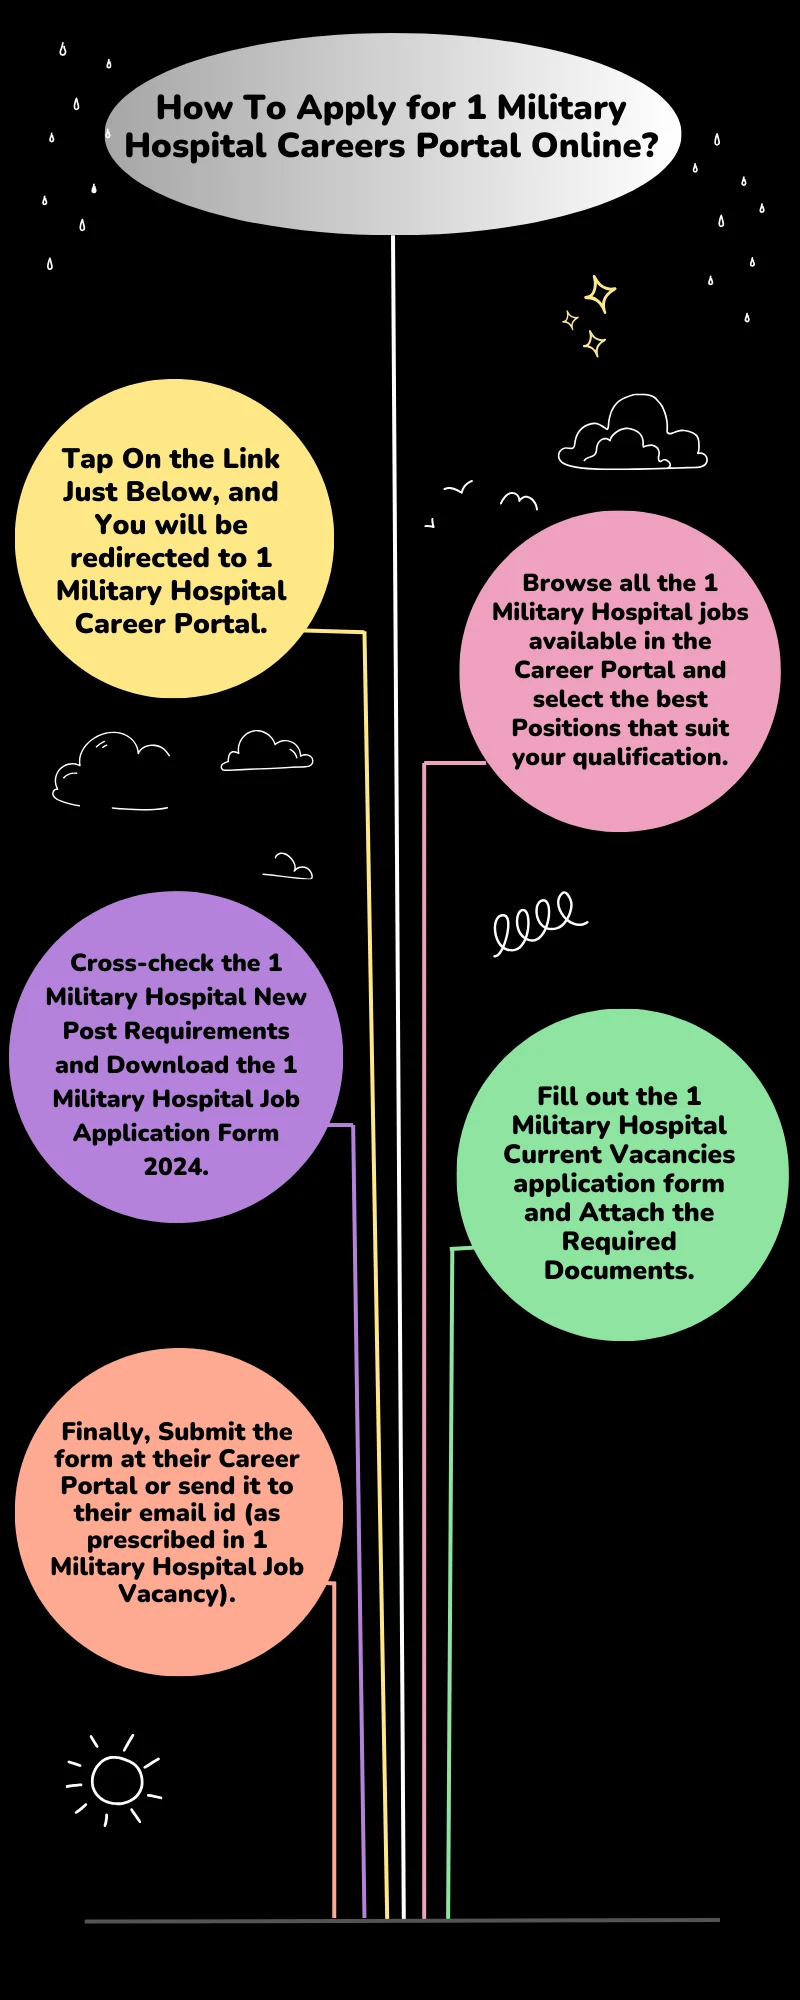 How To Apply for 1 Military Hospital Careers Portal Online?